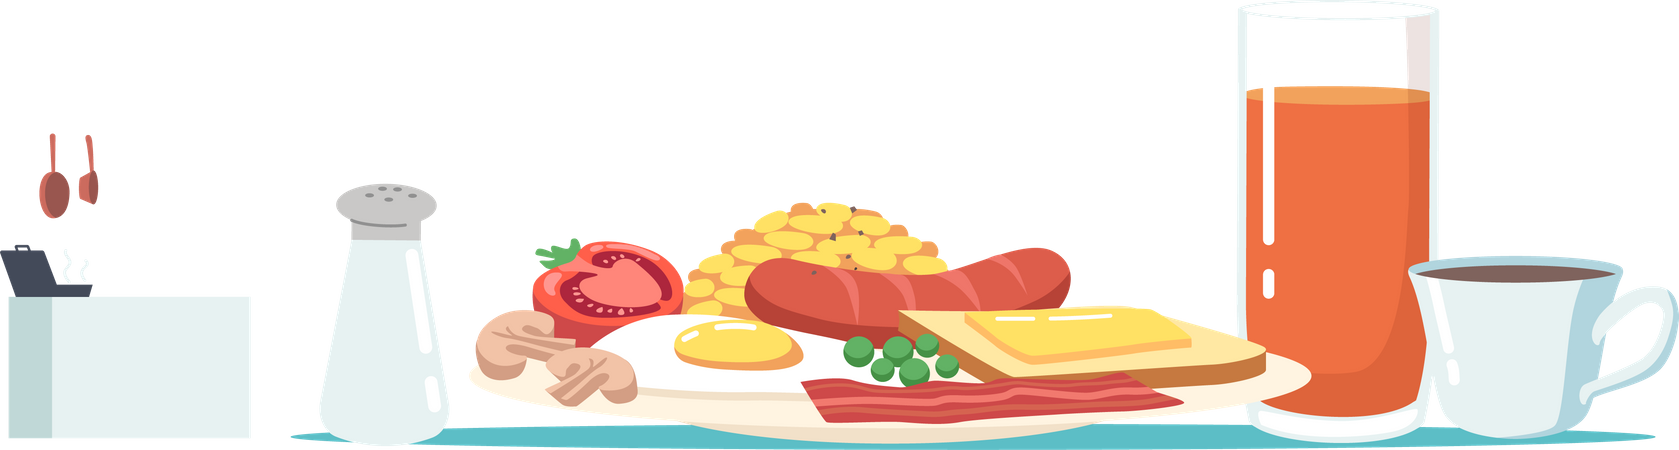 Breakfast table with dishes Illustration